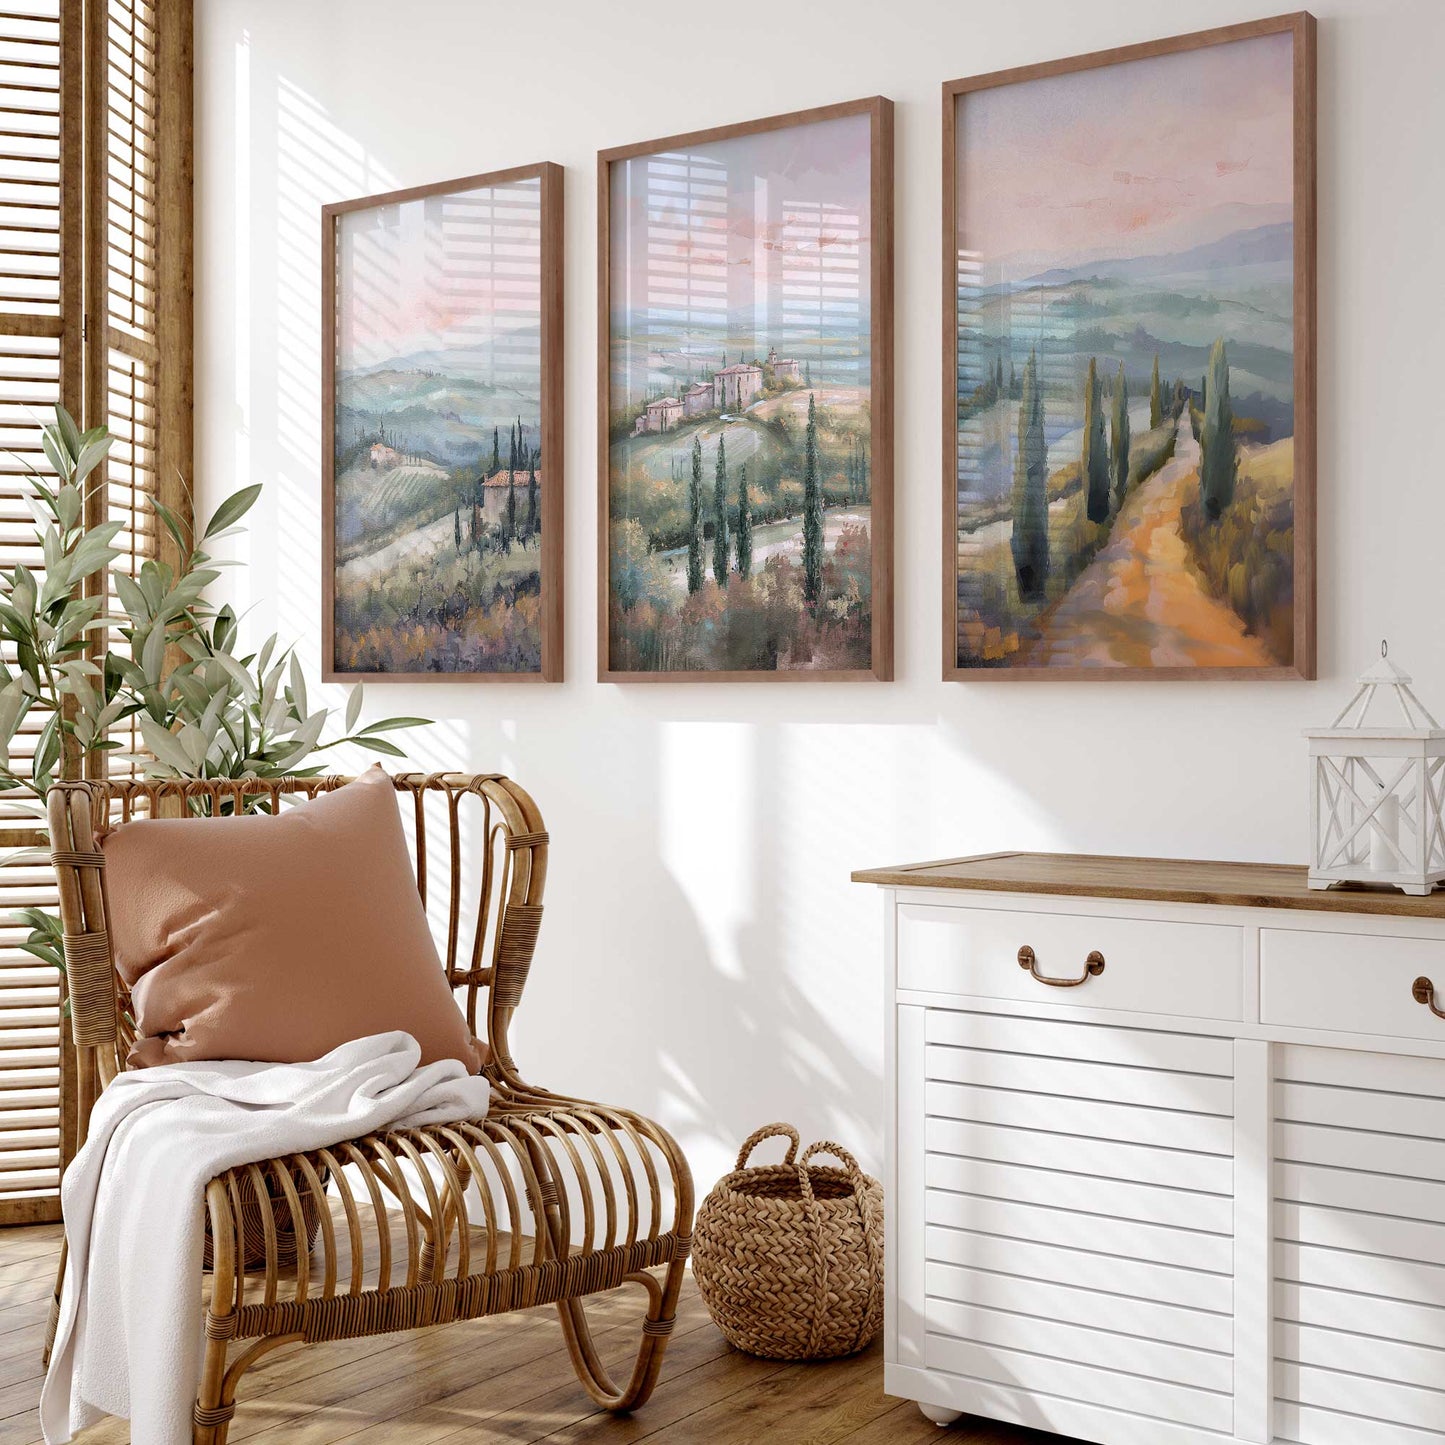 Dusk's Glow in Tuscany Set of 3 Print on Archival Matte Paper